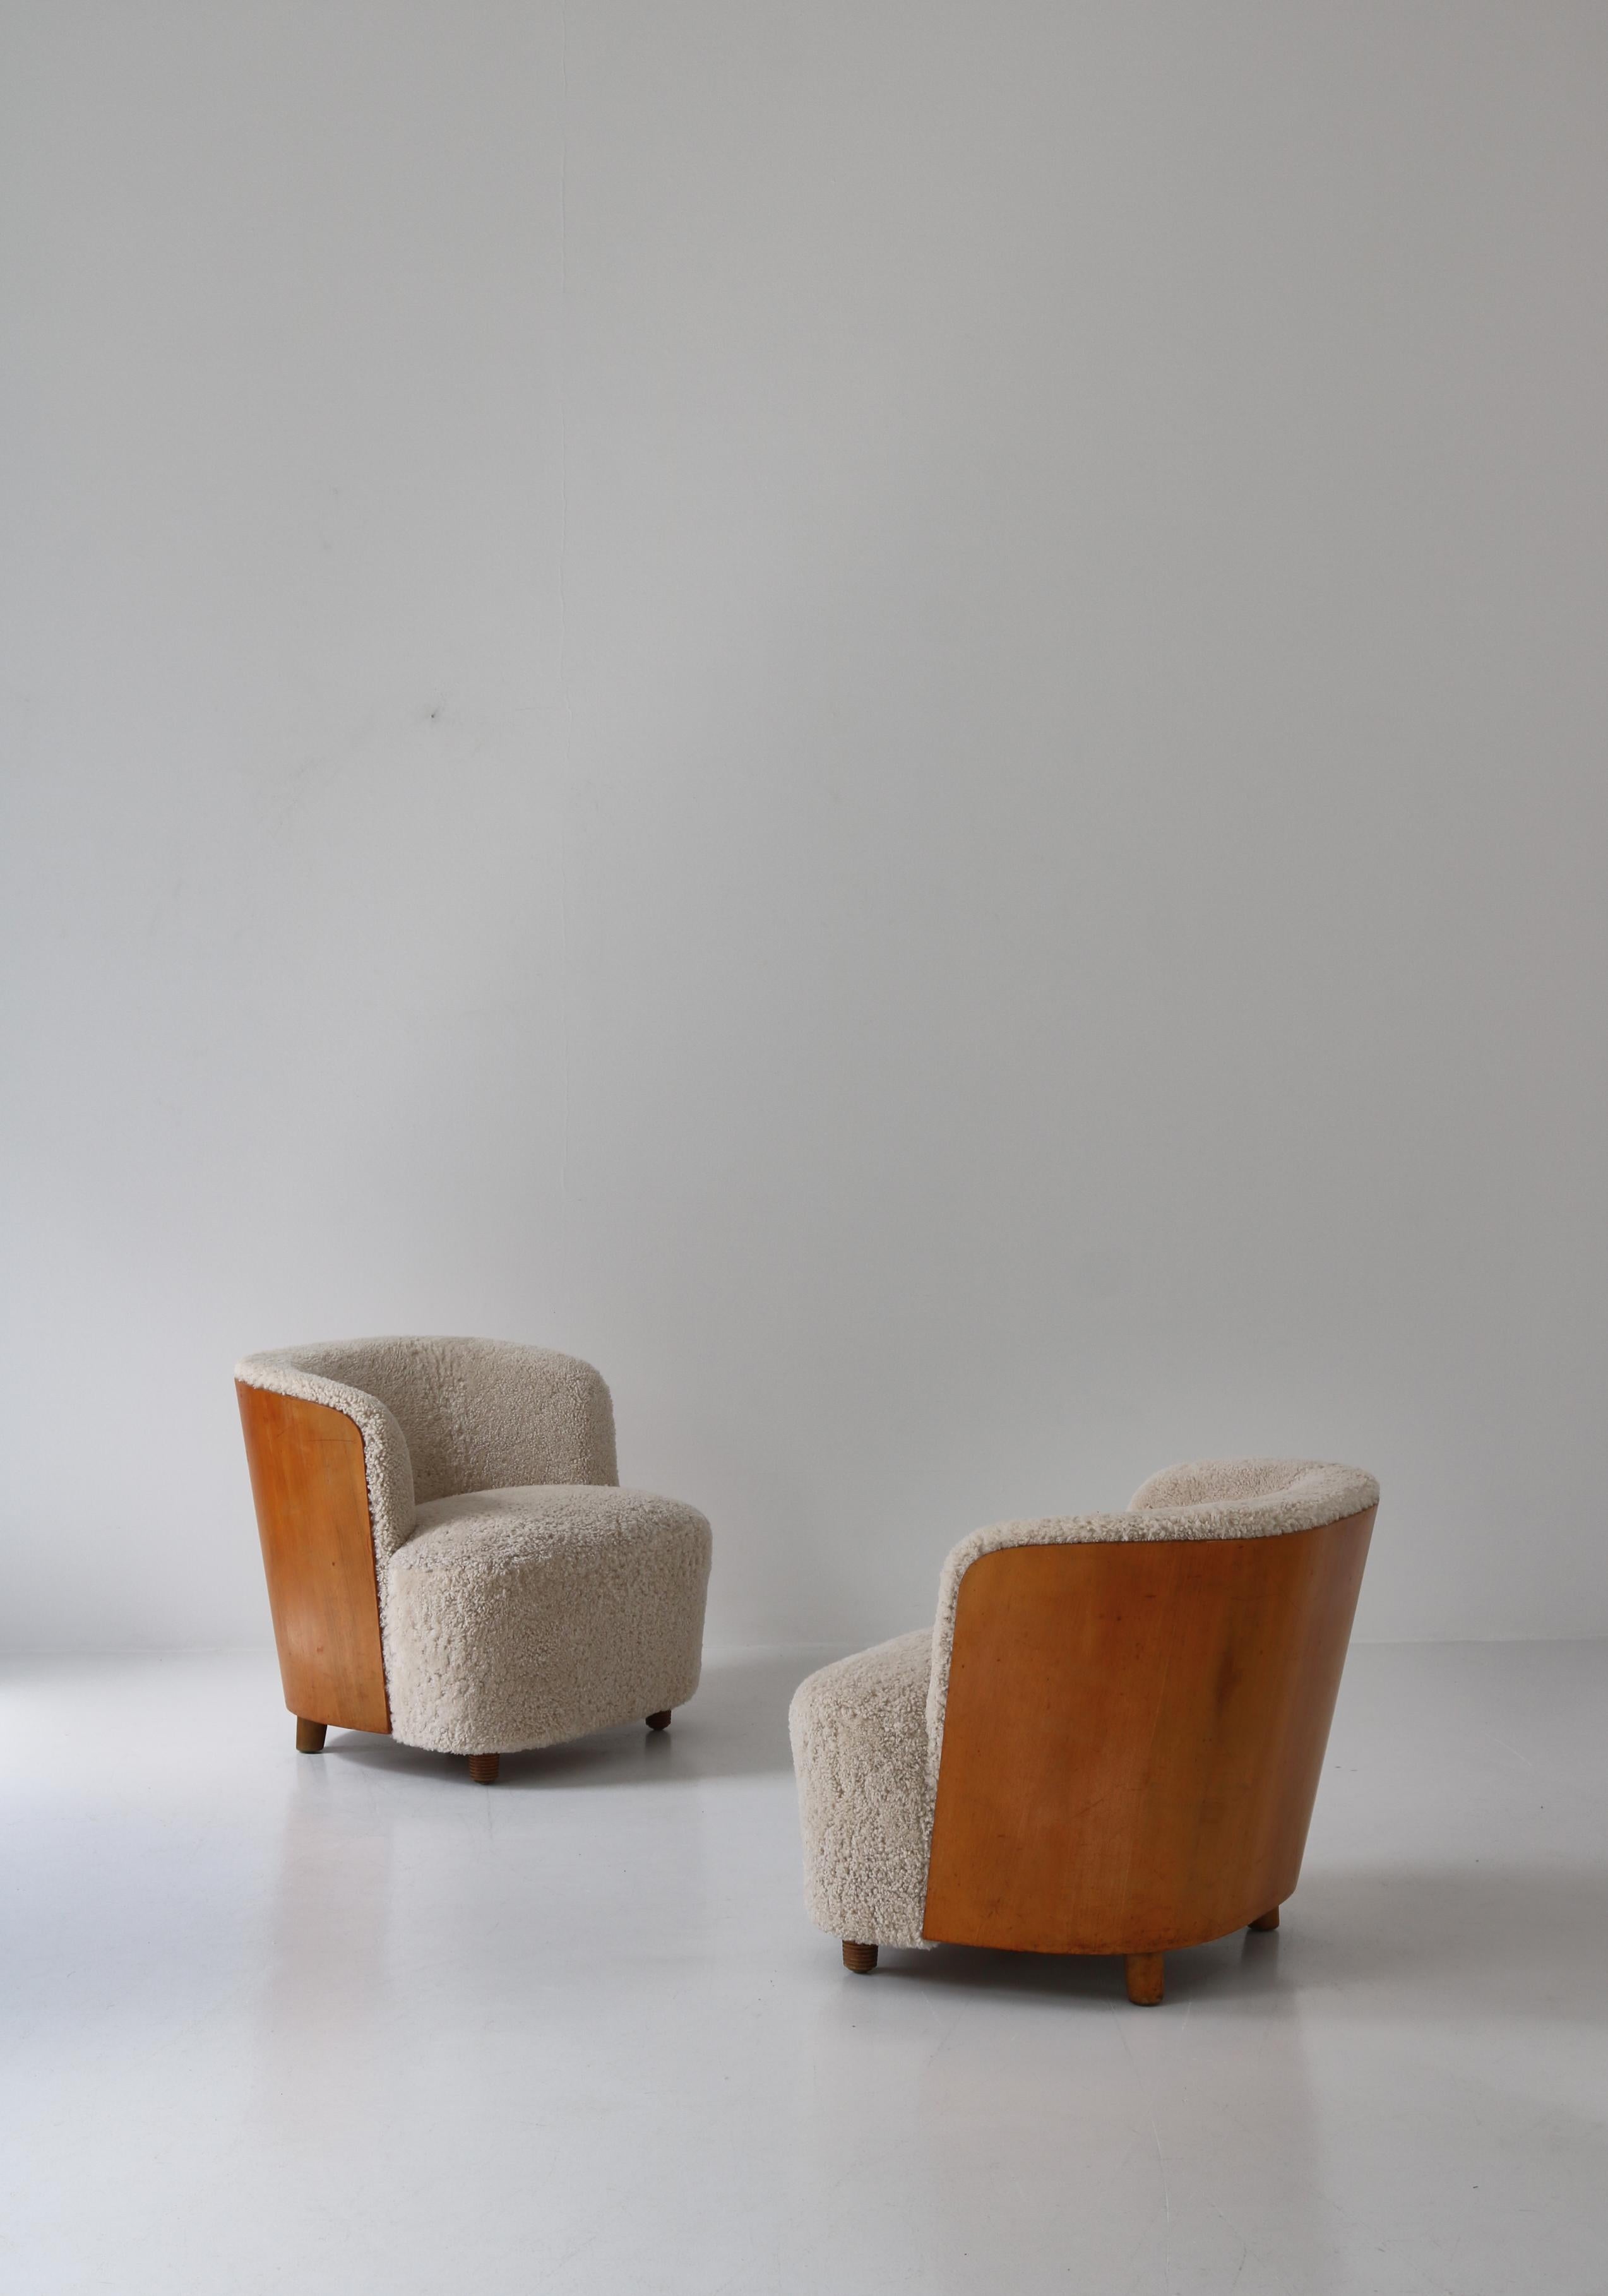 Mid-20th Century Scandinavian Modern Sheepskin and Peartree Easy Chairs by Rolf Engströmer, 1934 For Sale